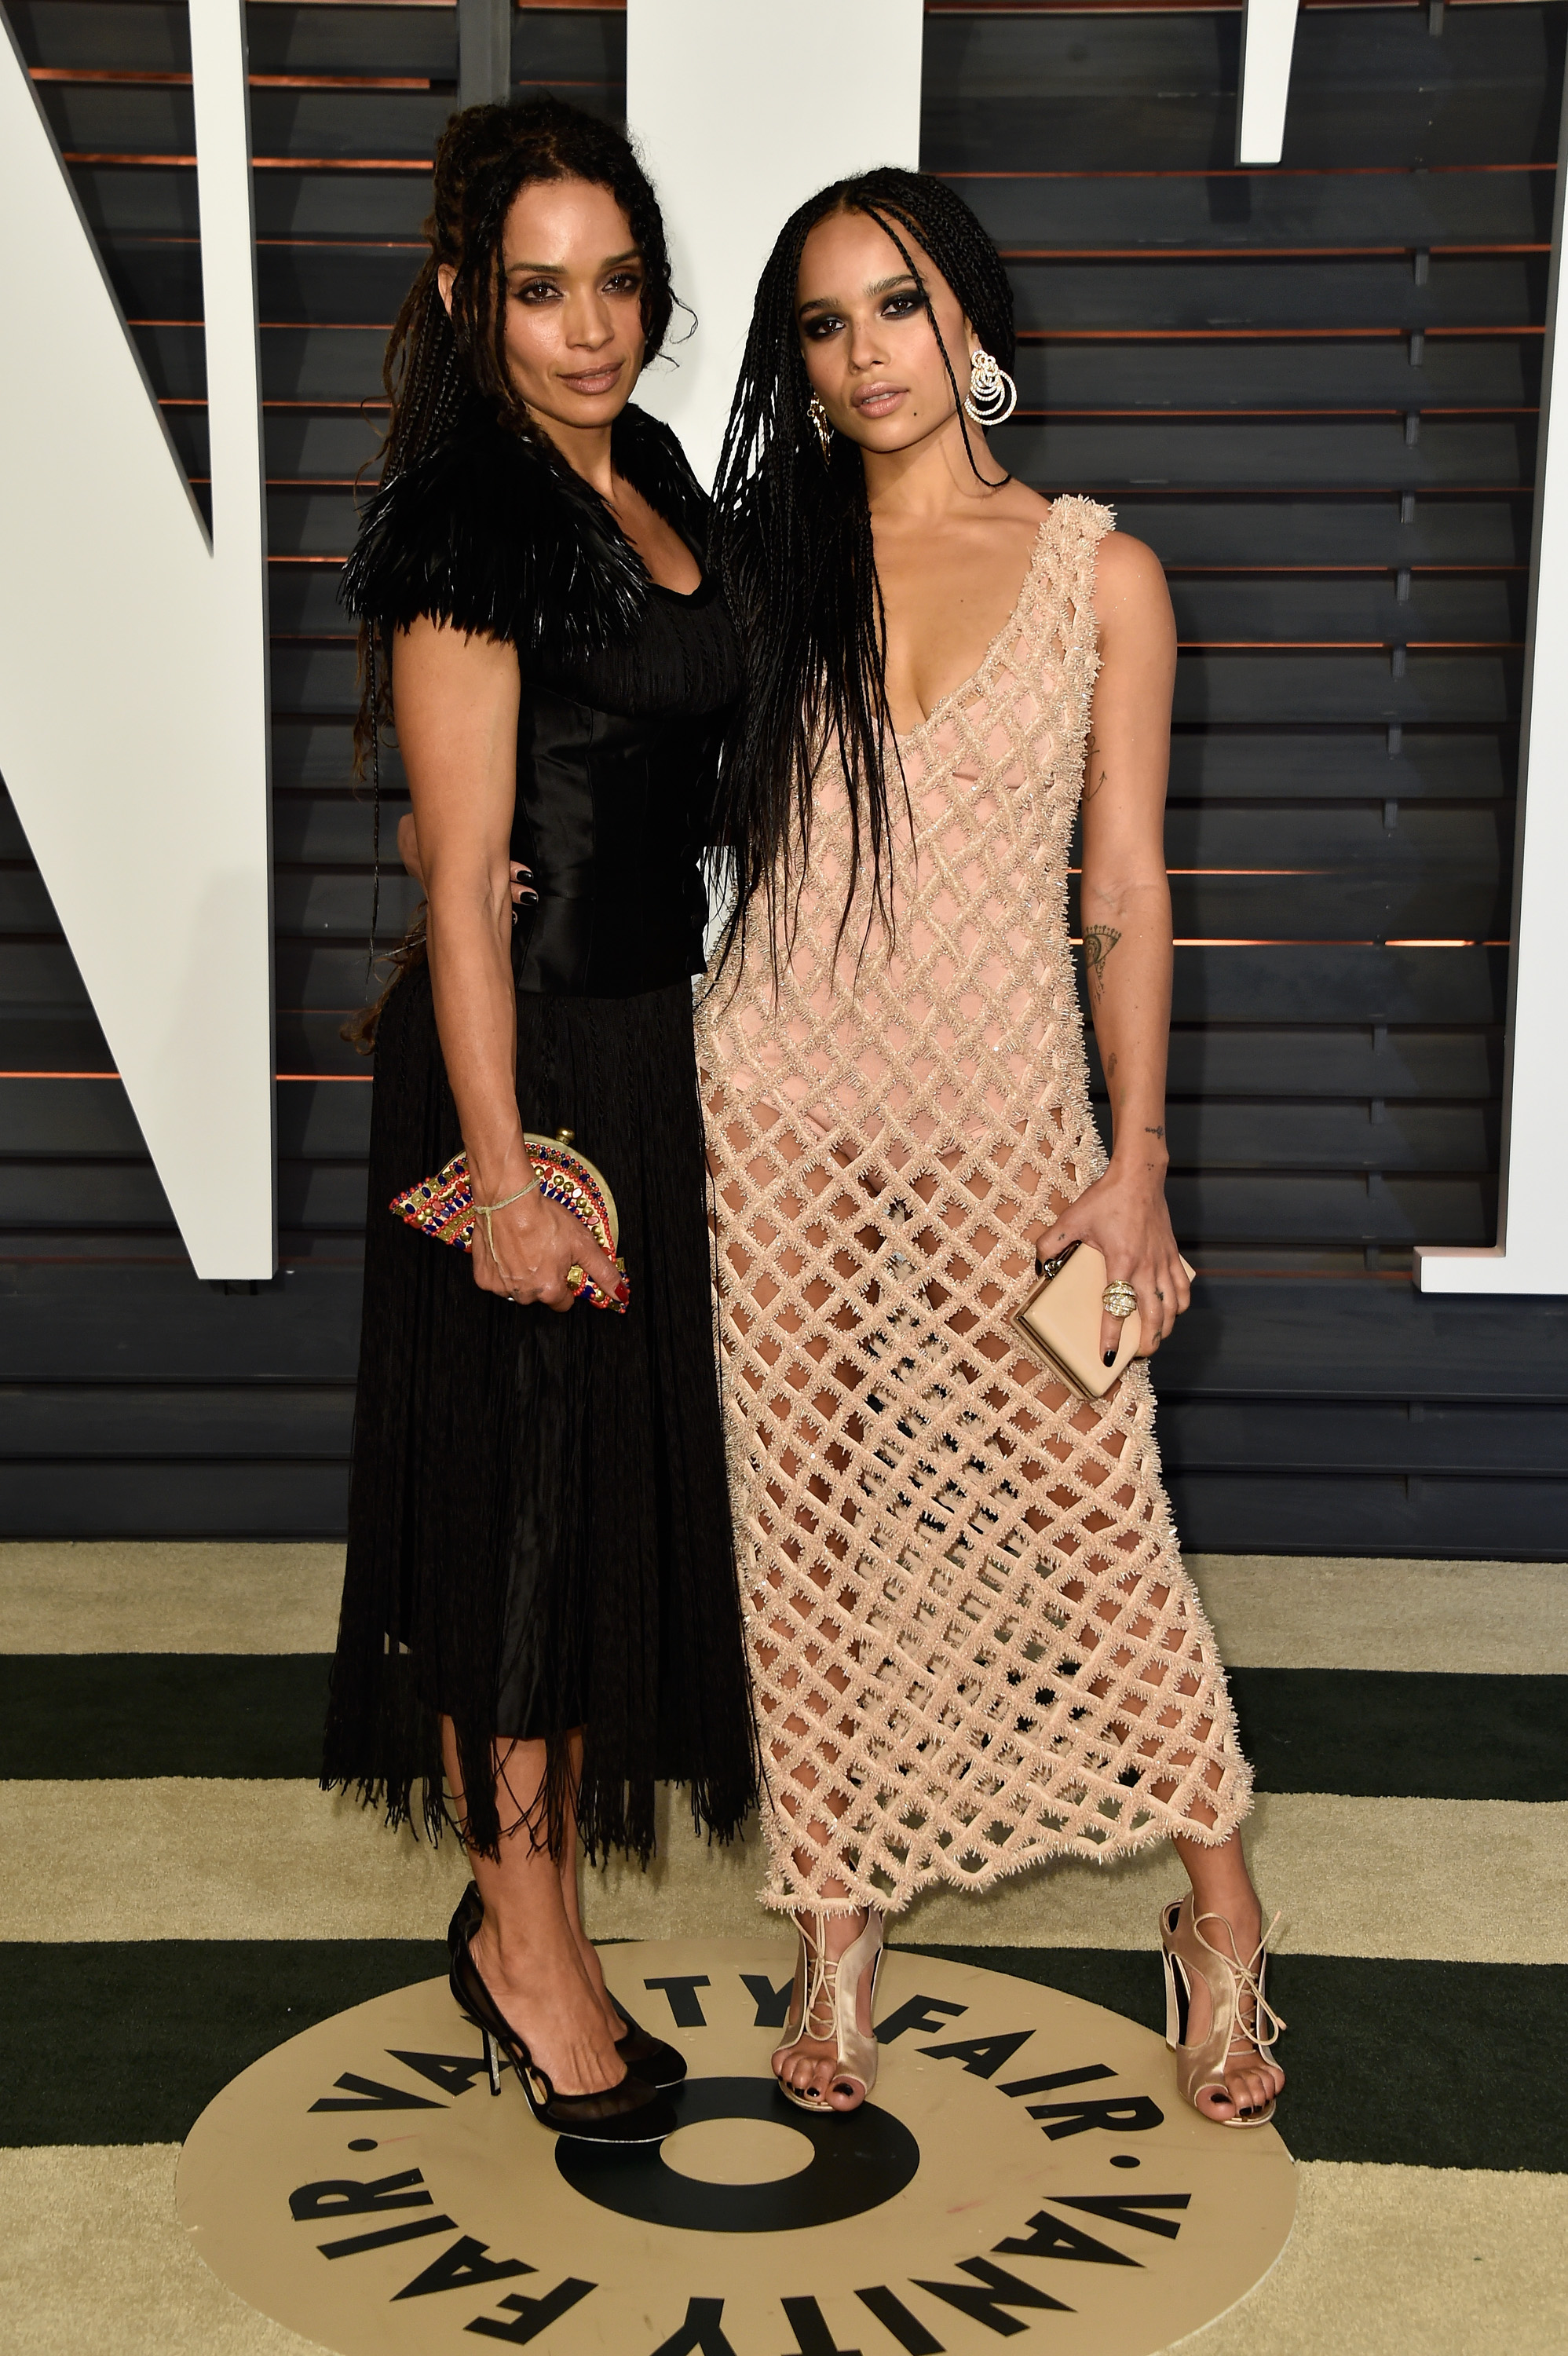 Actresses Lisa Bonet and Zoe Kravitz attend the 2015 Vanity Fair Oscar Party on February 22, 2015 (Photo by Pascal Le Segretain/Getty Images) (Getty Images&mdash;2015 Getty Images)